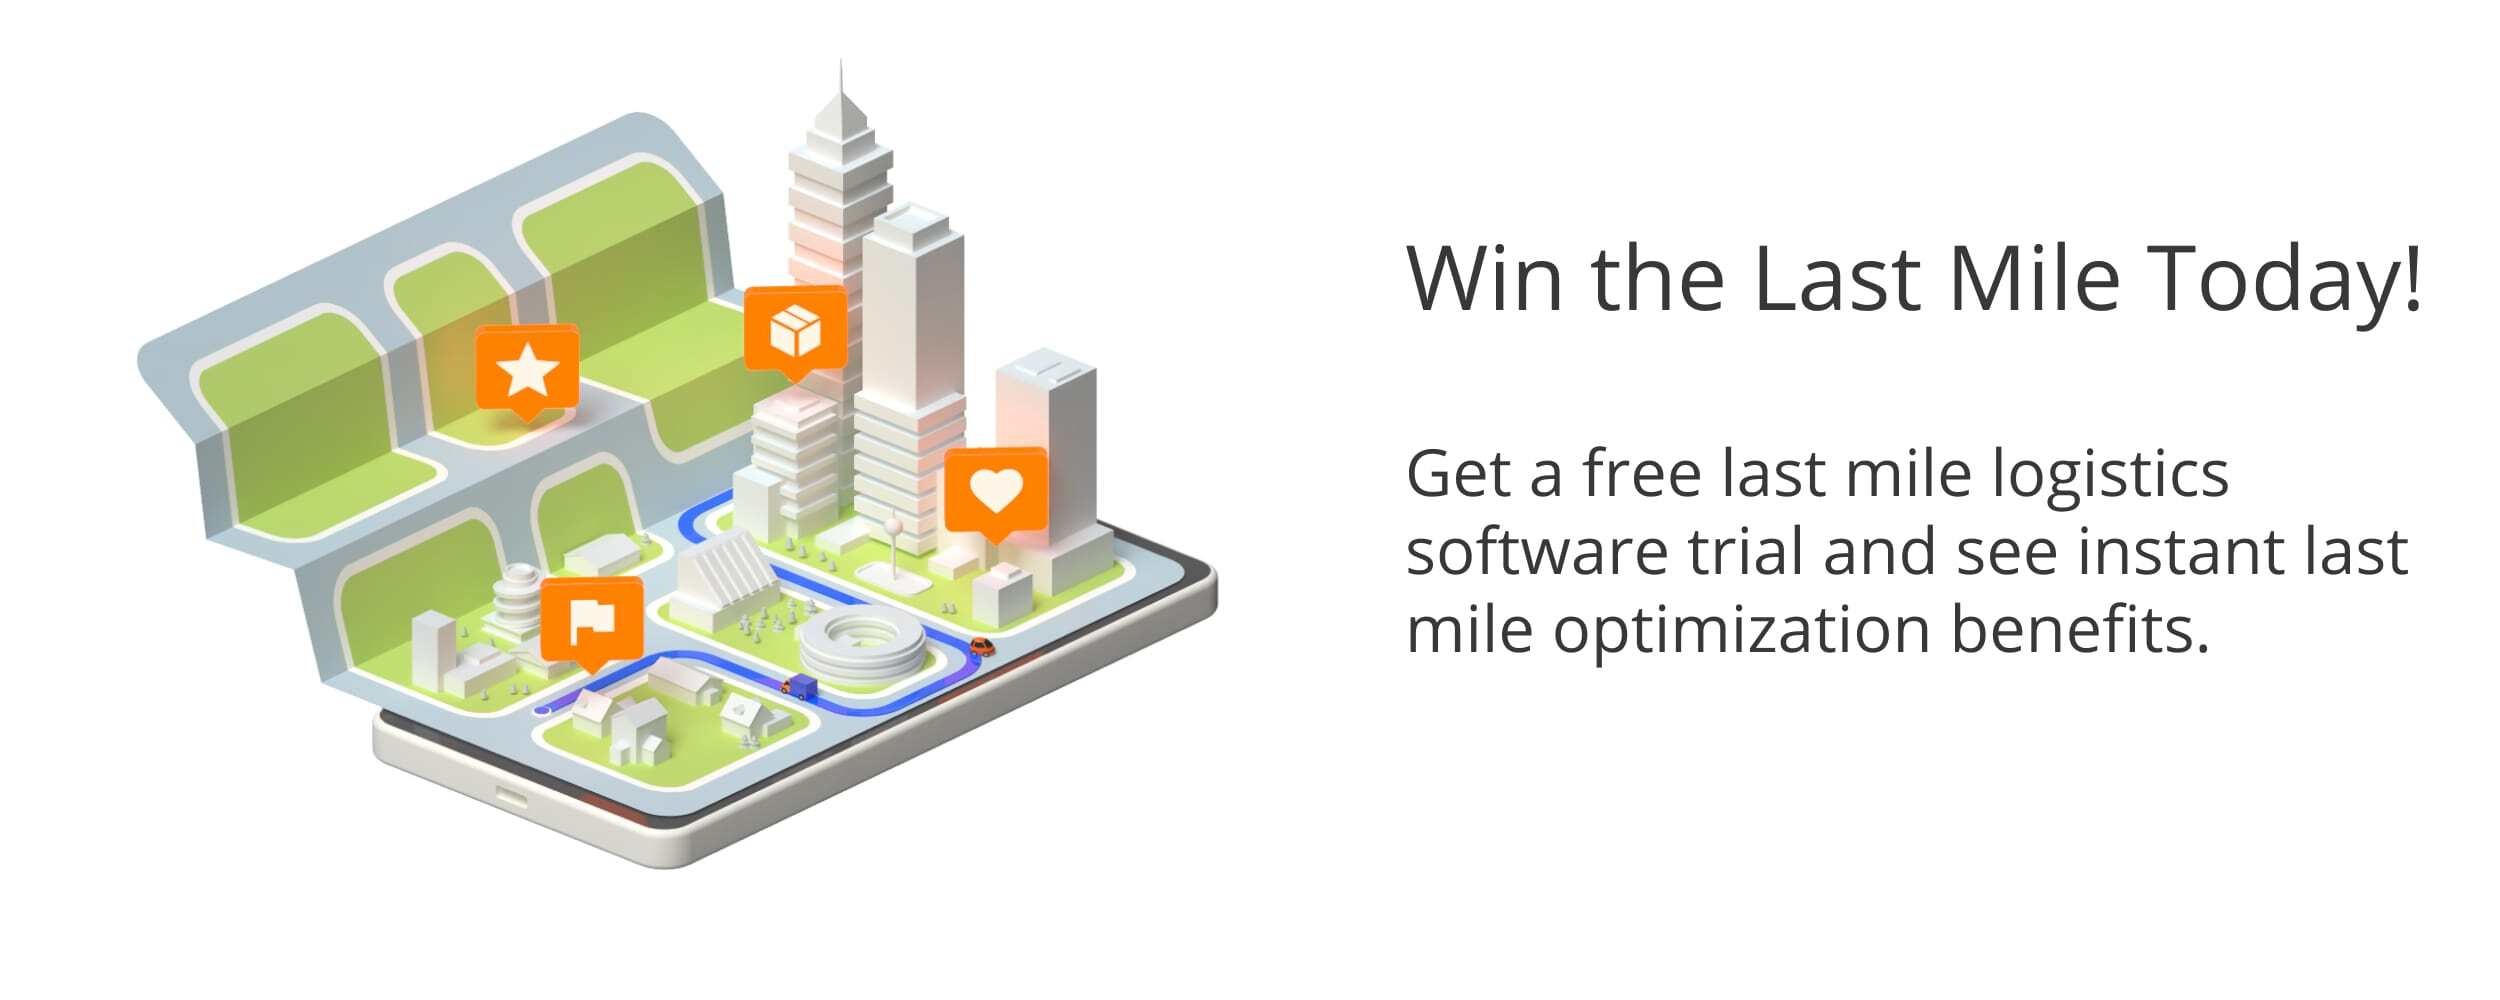 Free last mile delivery software for route optimization, fleet management, route dispatch, delivery scheduling, and more.